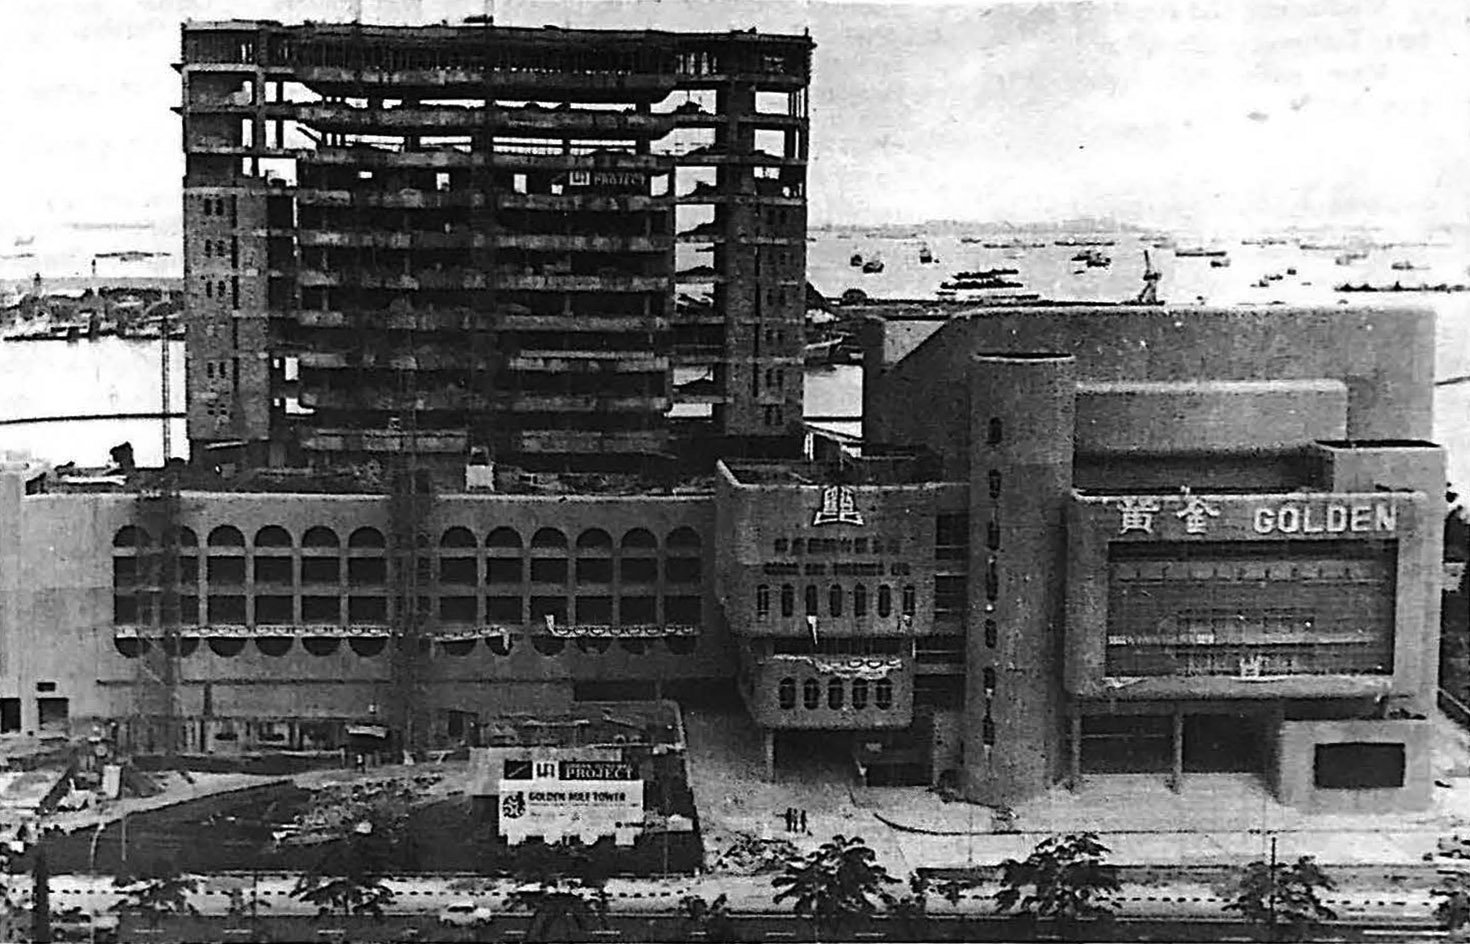 View of the building under construction. Source: Asian Building &amp; Construction, June (1975)